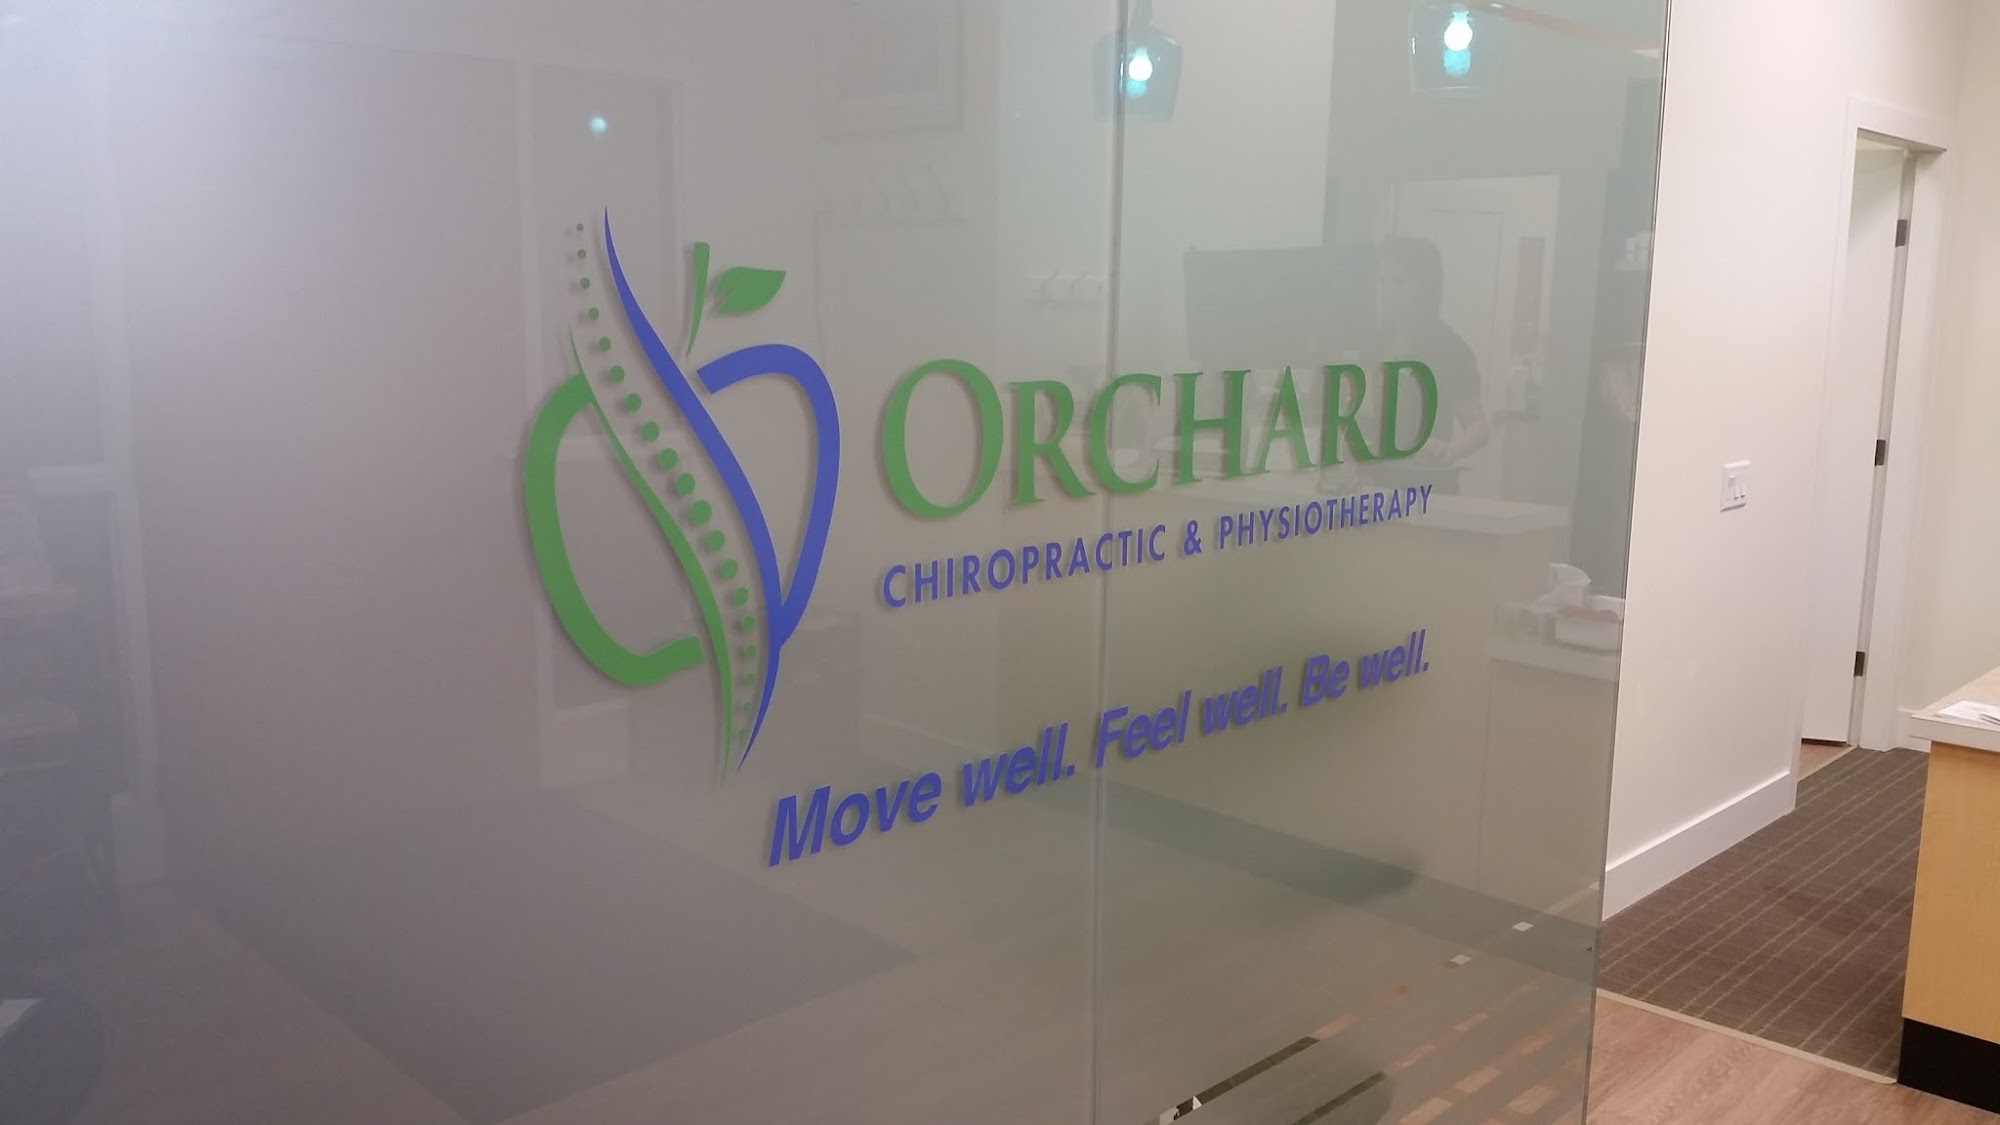 Orchard Chiropractic & Physiotherapy